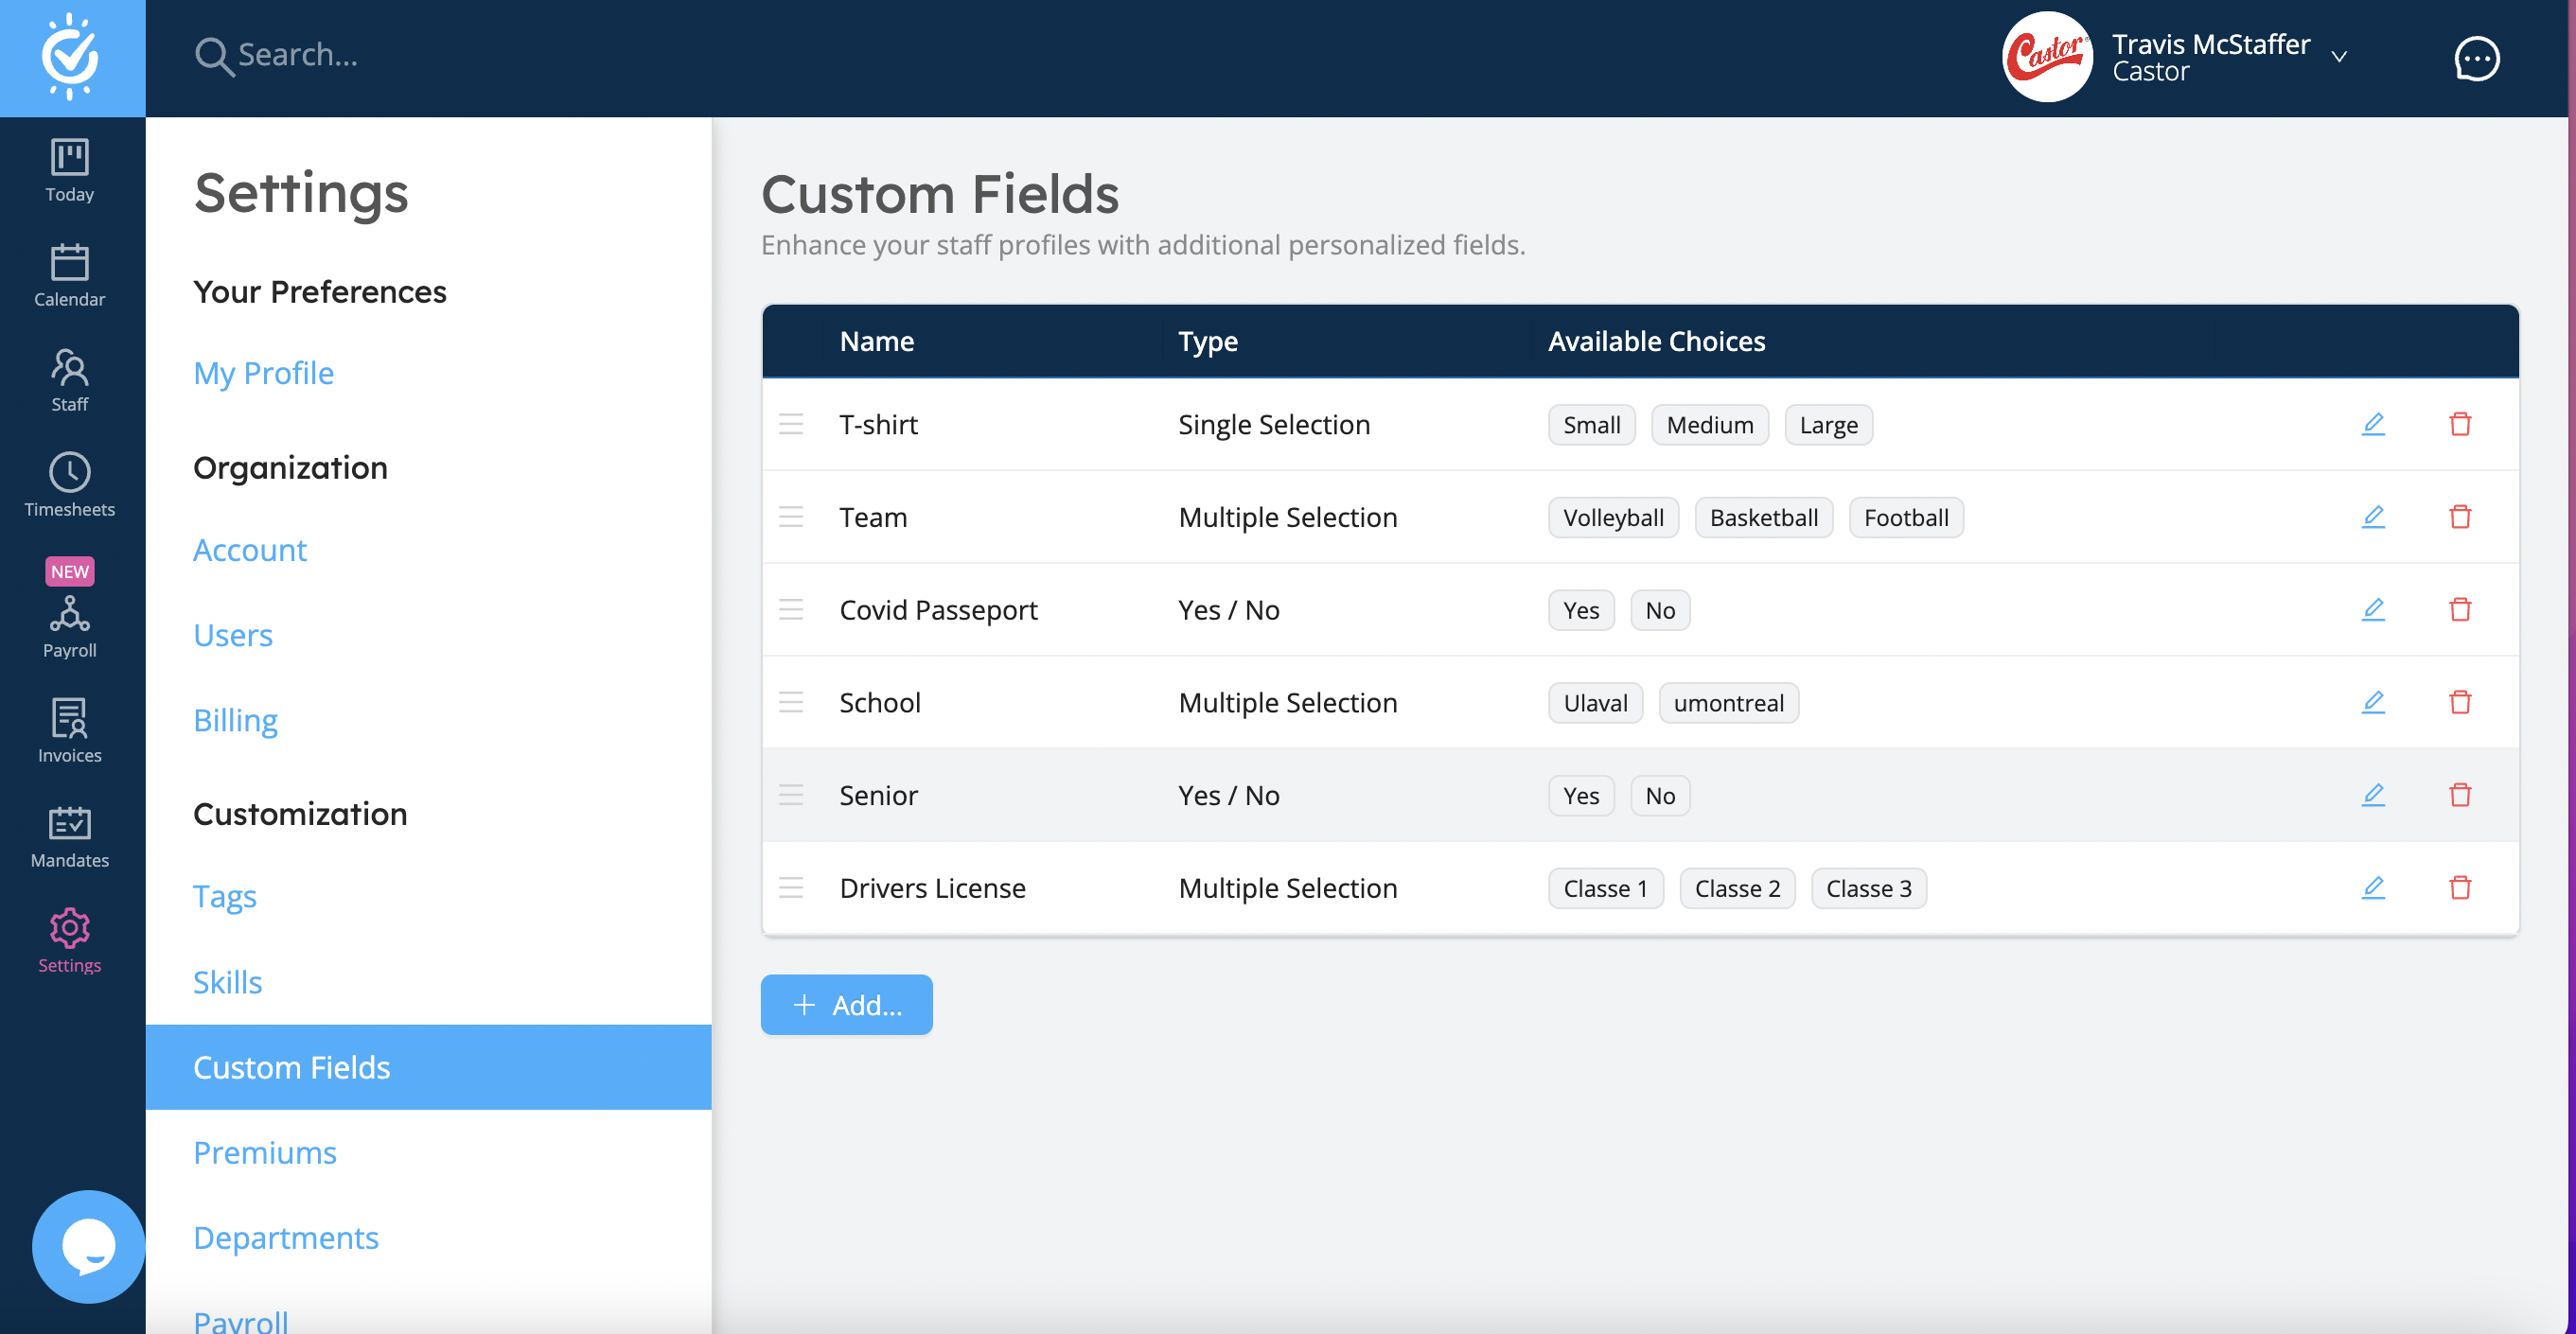 Add custom fields to your staff. Filter and send job offers to relevant staff only.